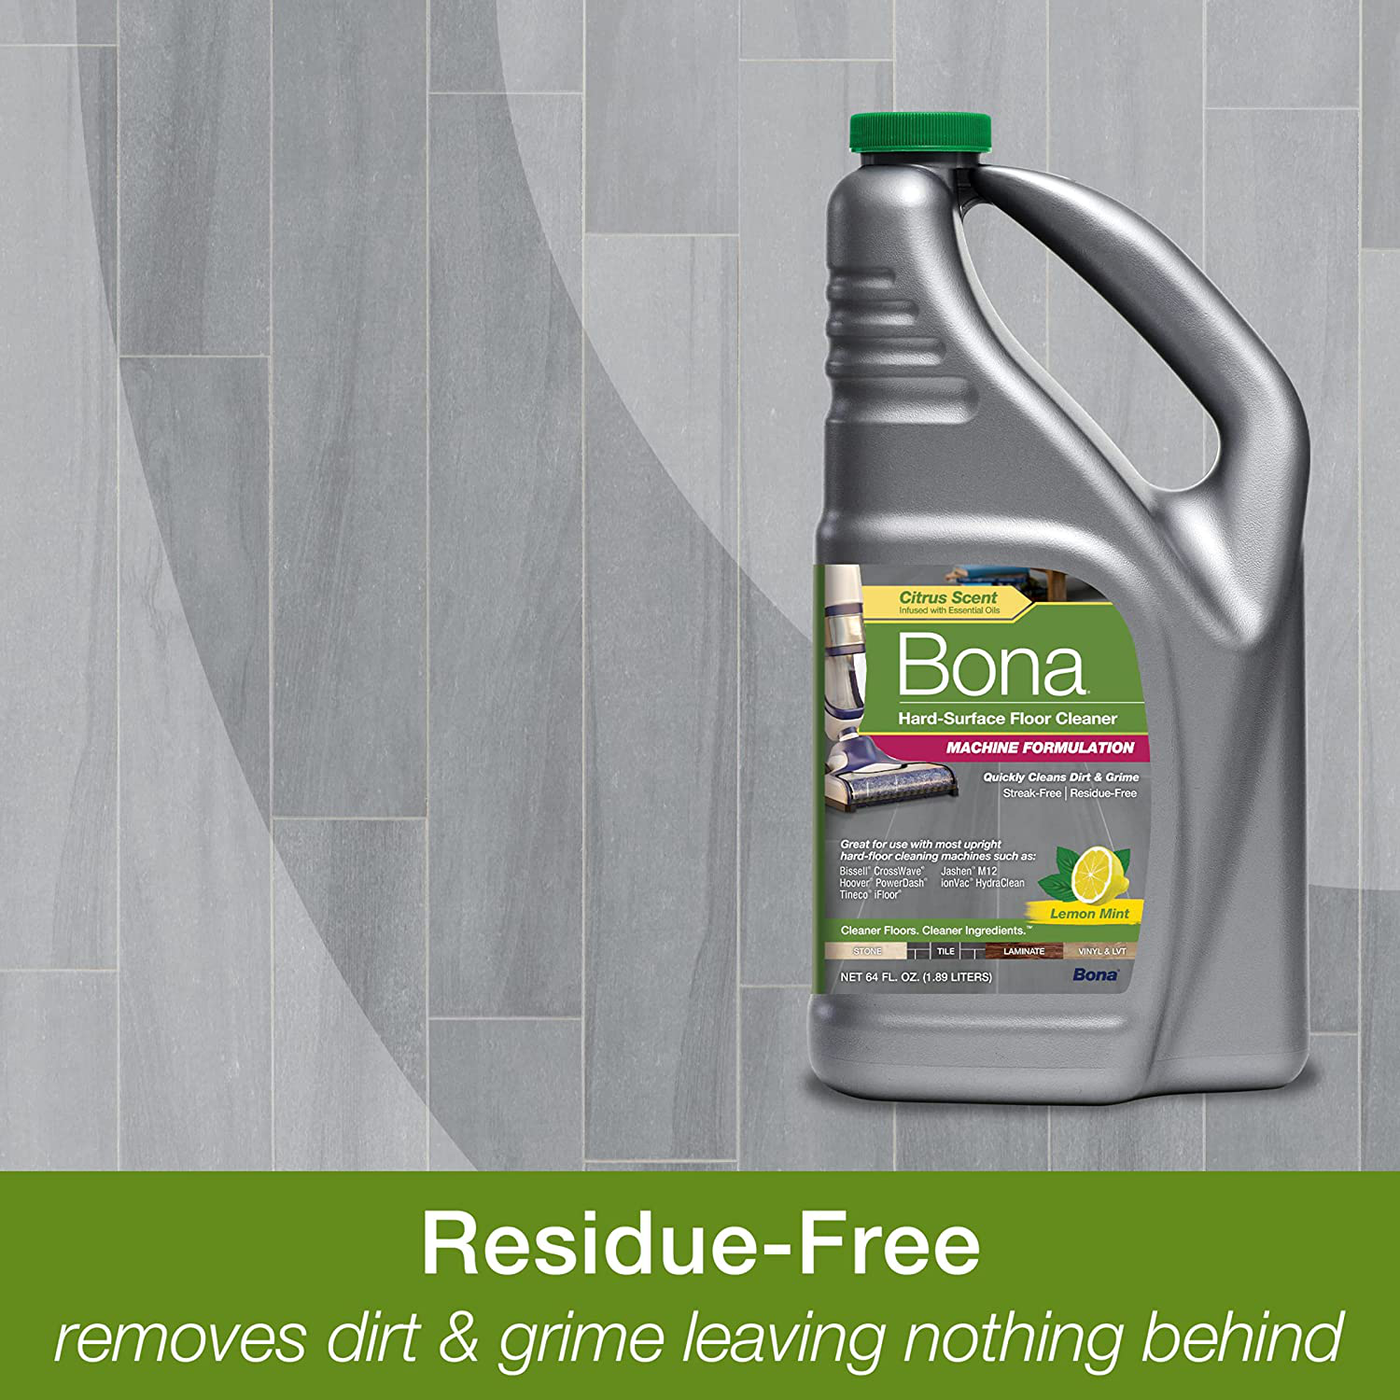 Bona Hard-Surface Floor Cleaner for Stone, Tile, Laminate, and LVT Cleaning Machine Formulation, Concentrate Refill, 64 Fl Oz